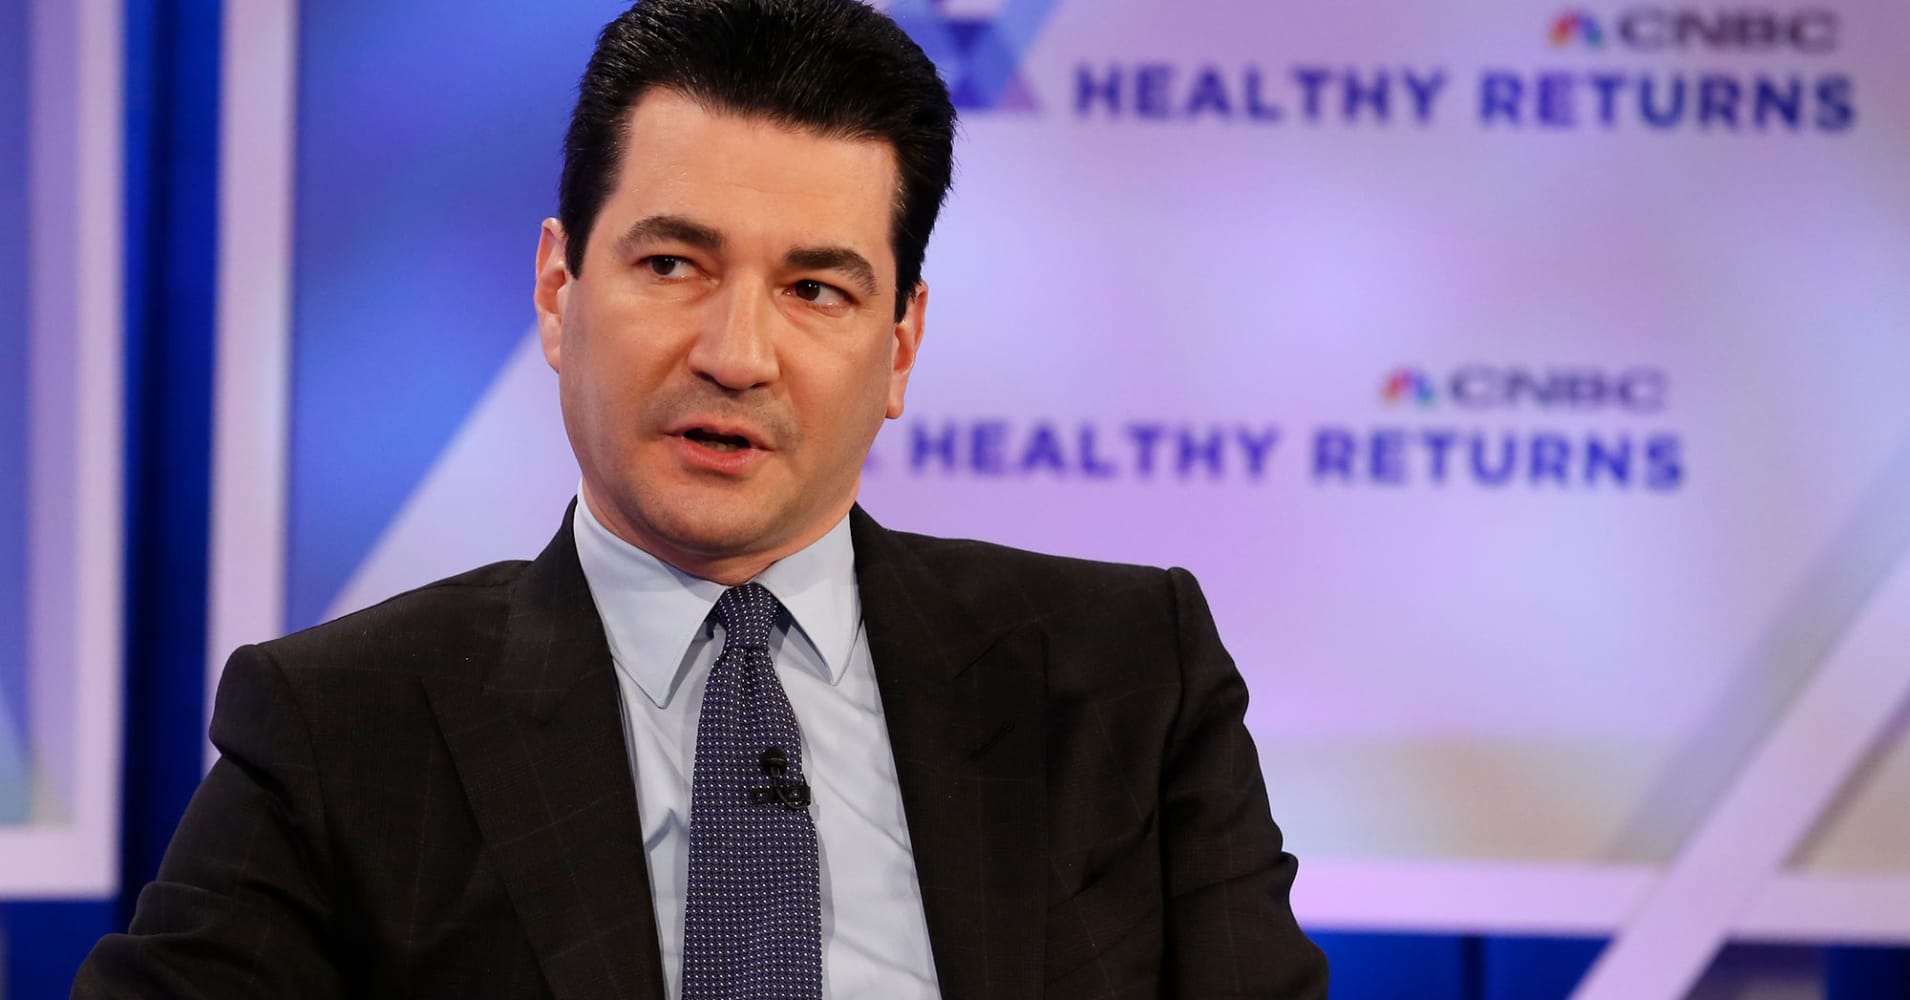 Outgoing FDA chief Scott Gottlieb gets personal about leaving 'the best job' he's ever had